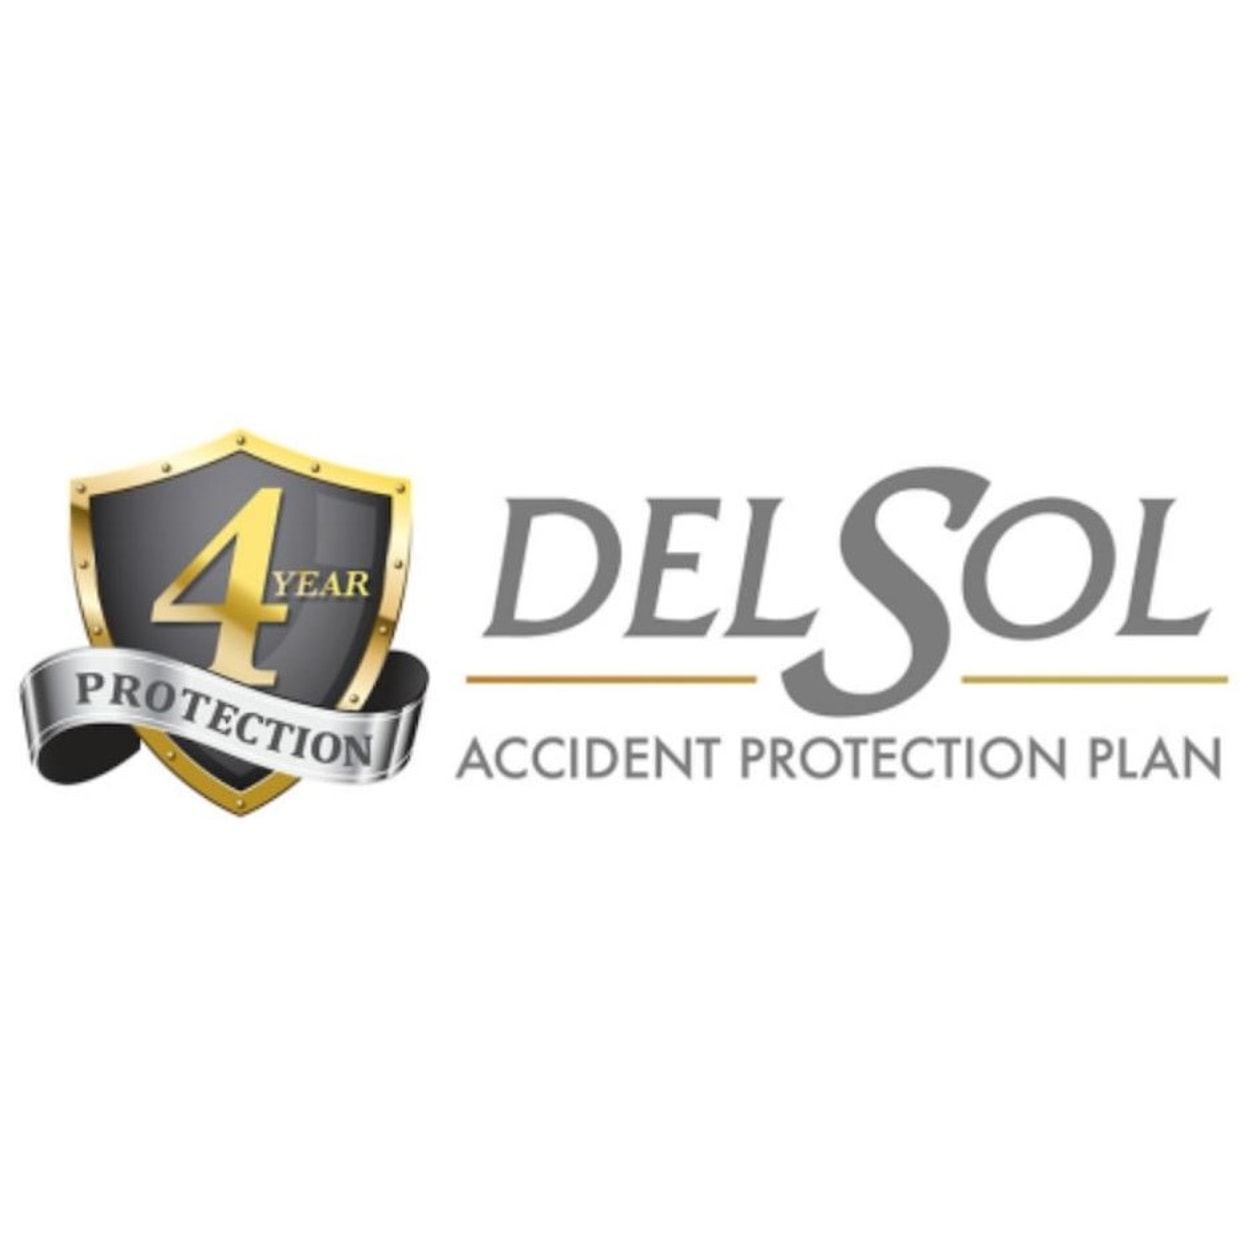 DS Del Sol Protection Plan 4YR PP $1,251 to $1,500